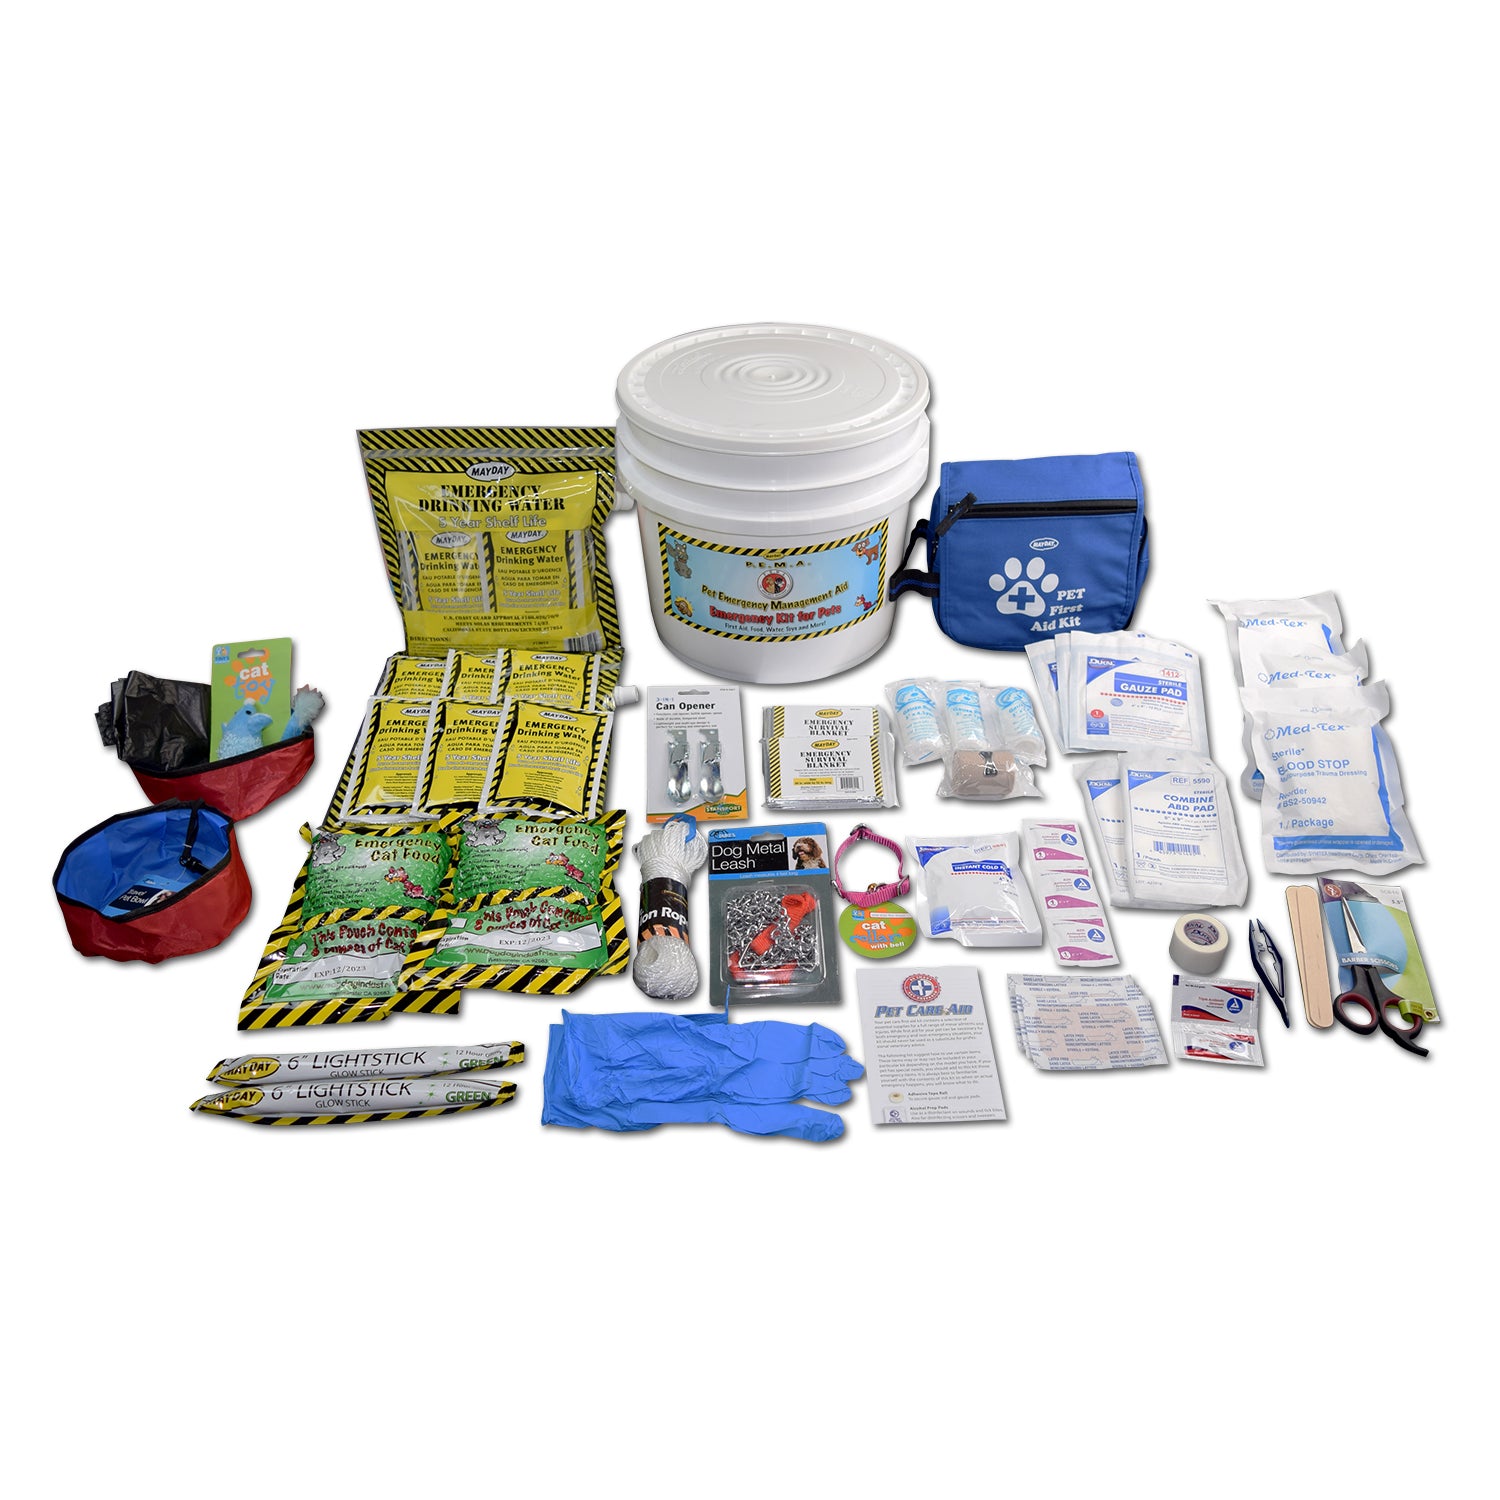 EMERGENCY CAT KIT WITH FIRST AID, FOOD, WATER, TOYS AND MORE 5 YEAR SHELF LIFE